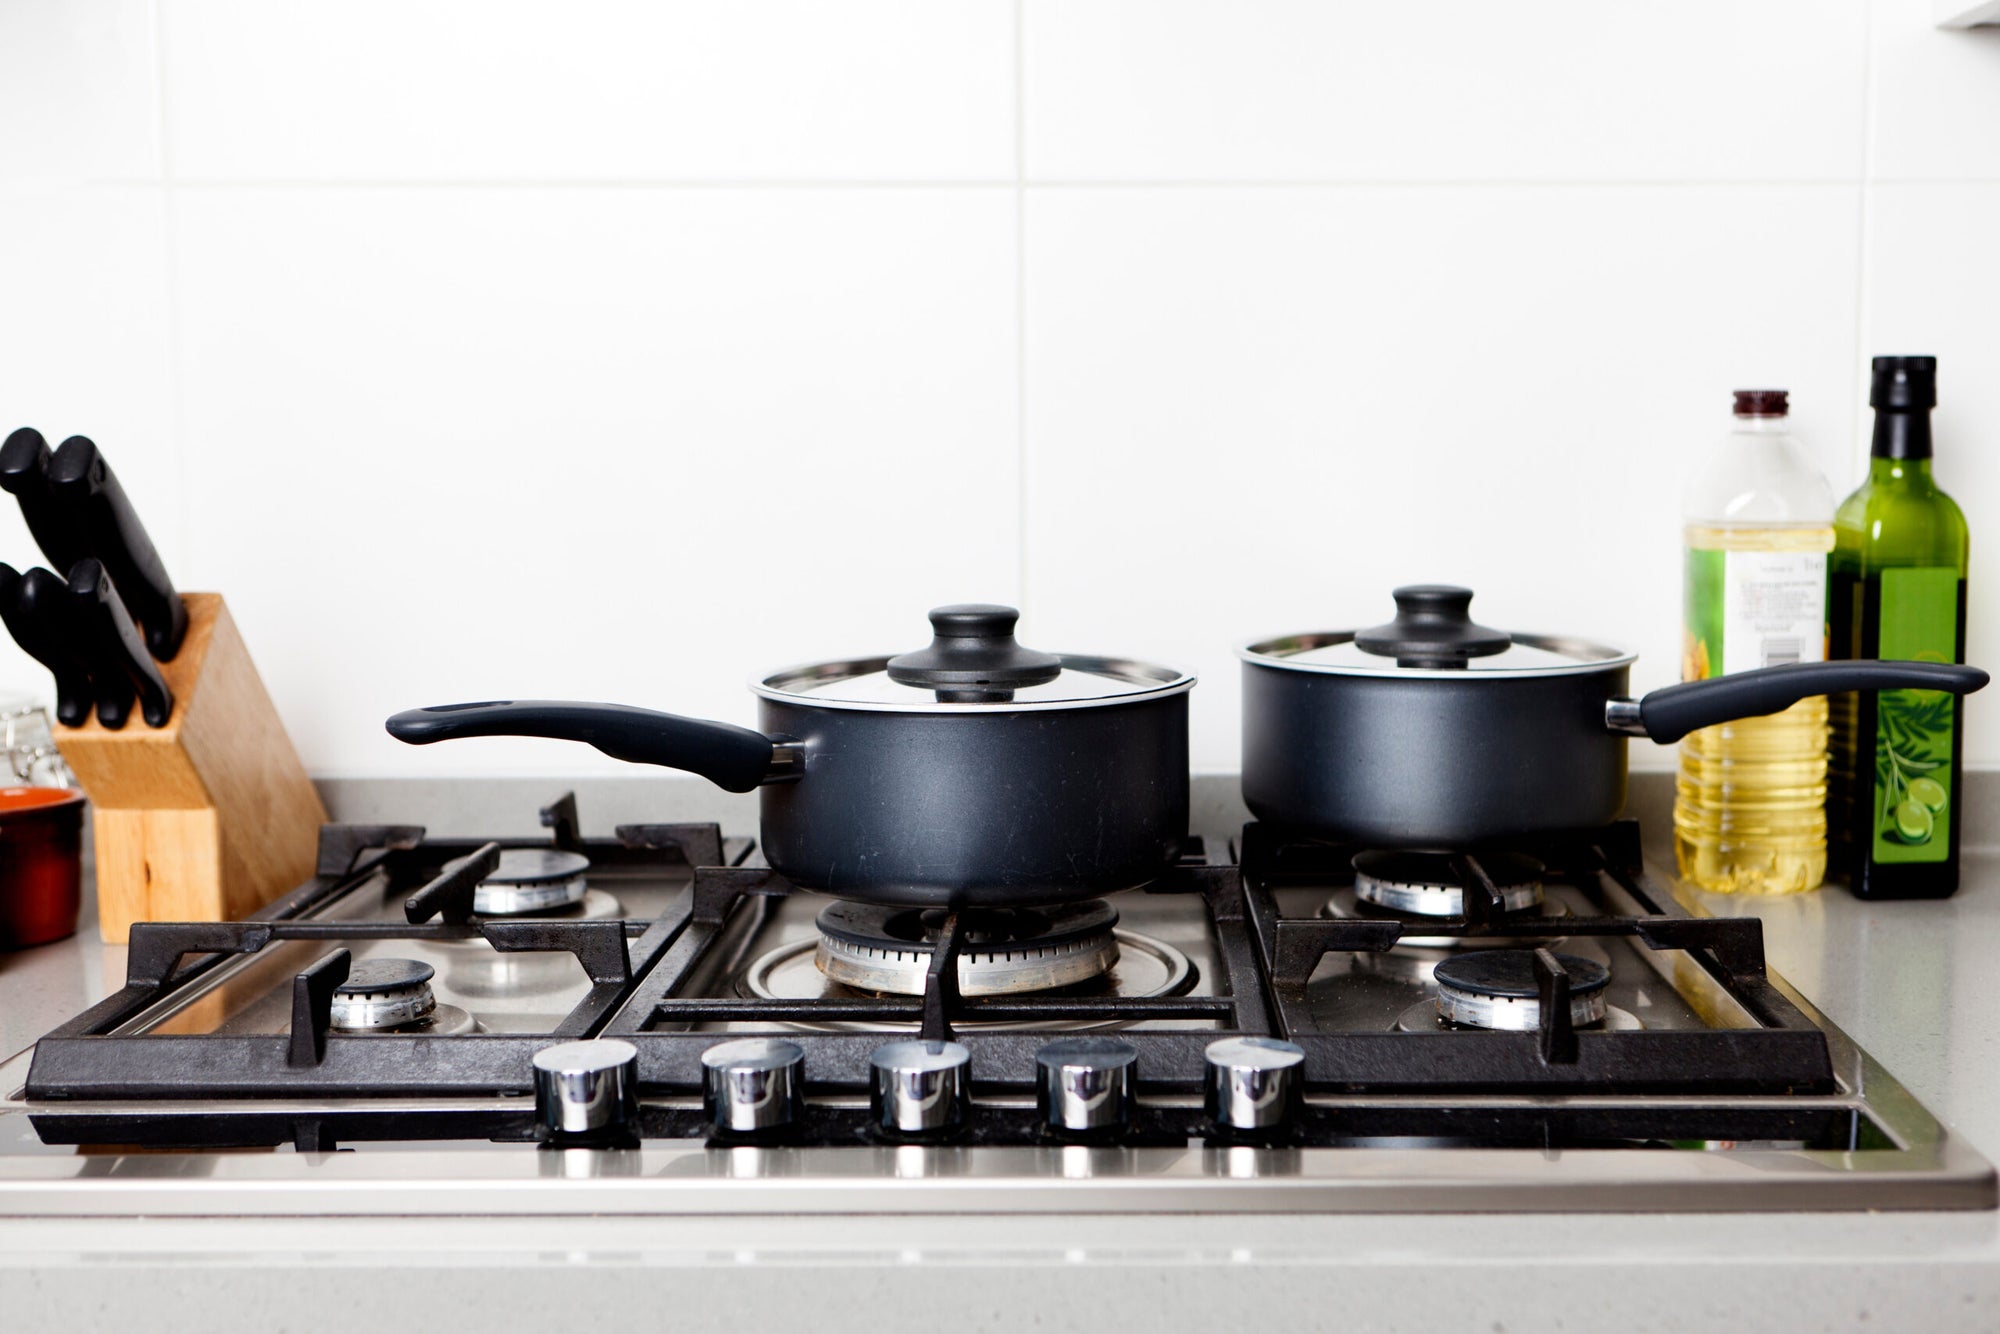 Should You Register for a Cookware Set or Individual Items?